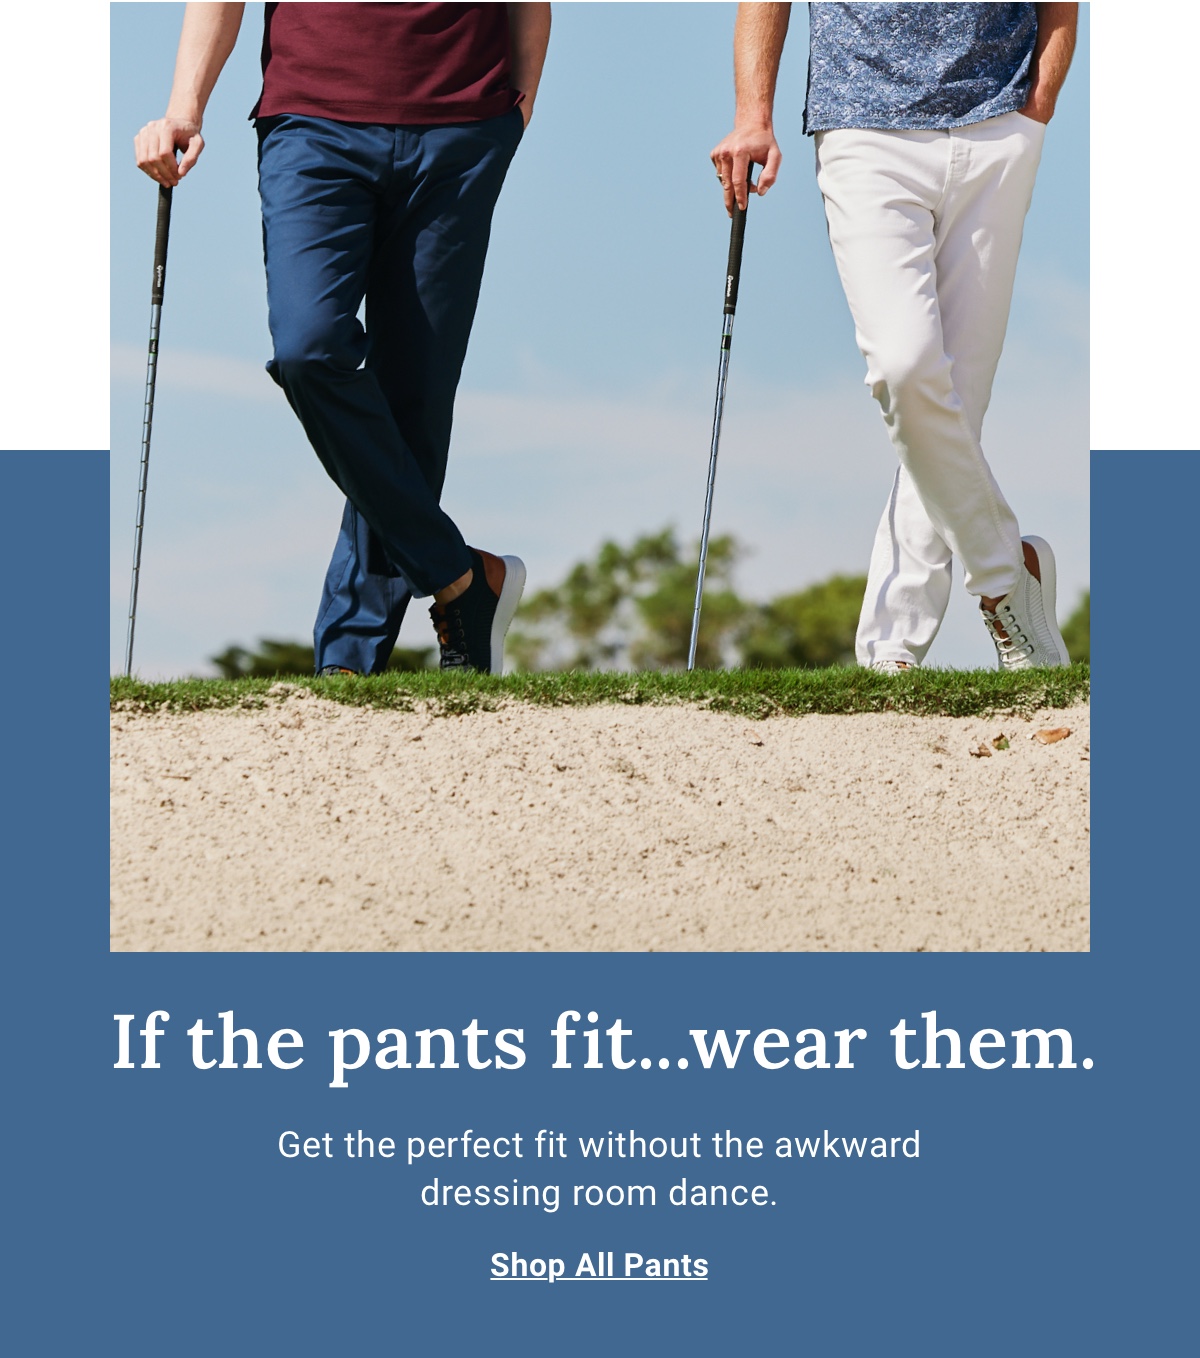 If the pants fit...wear them. Get the perfect fit without the awkward dressing room dance. - Shop All Pants